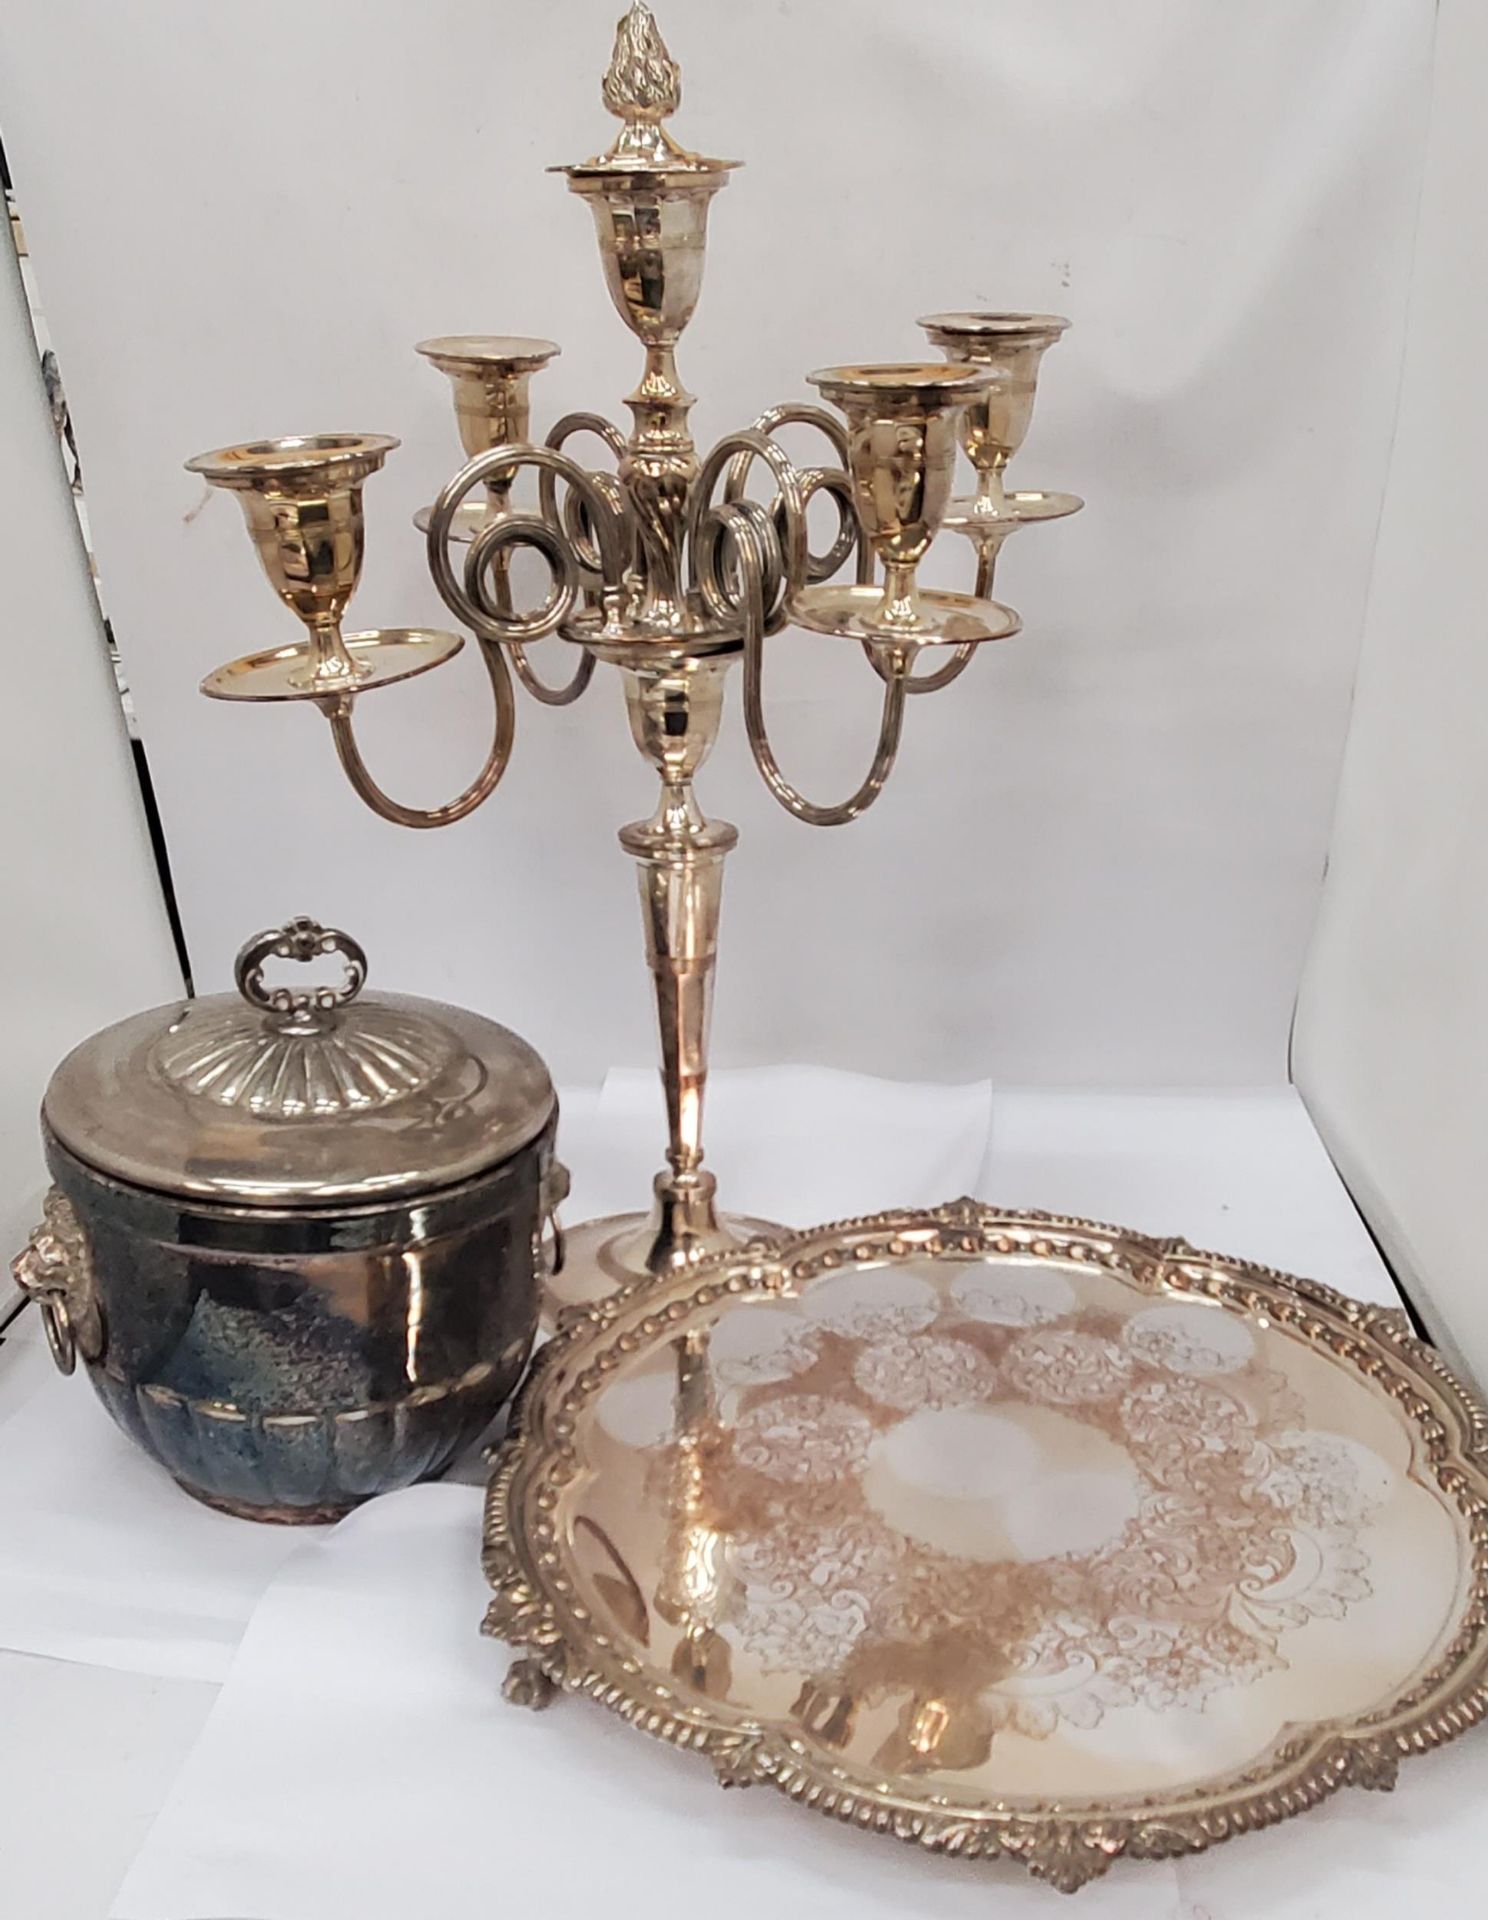 A QUANTITY OF SILVER PLATED ITEMS TO INCLUDE A CANDLEABRA WITH FIVE BRANCHES AND A SNUFFER, AN